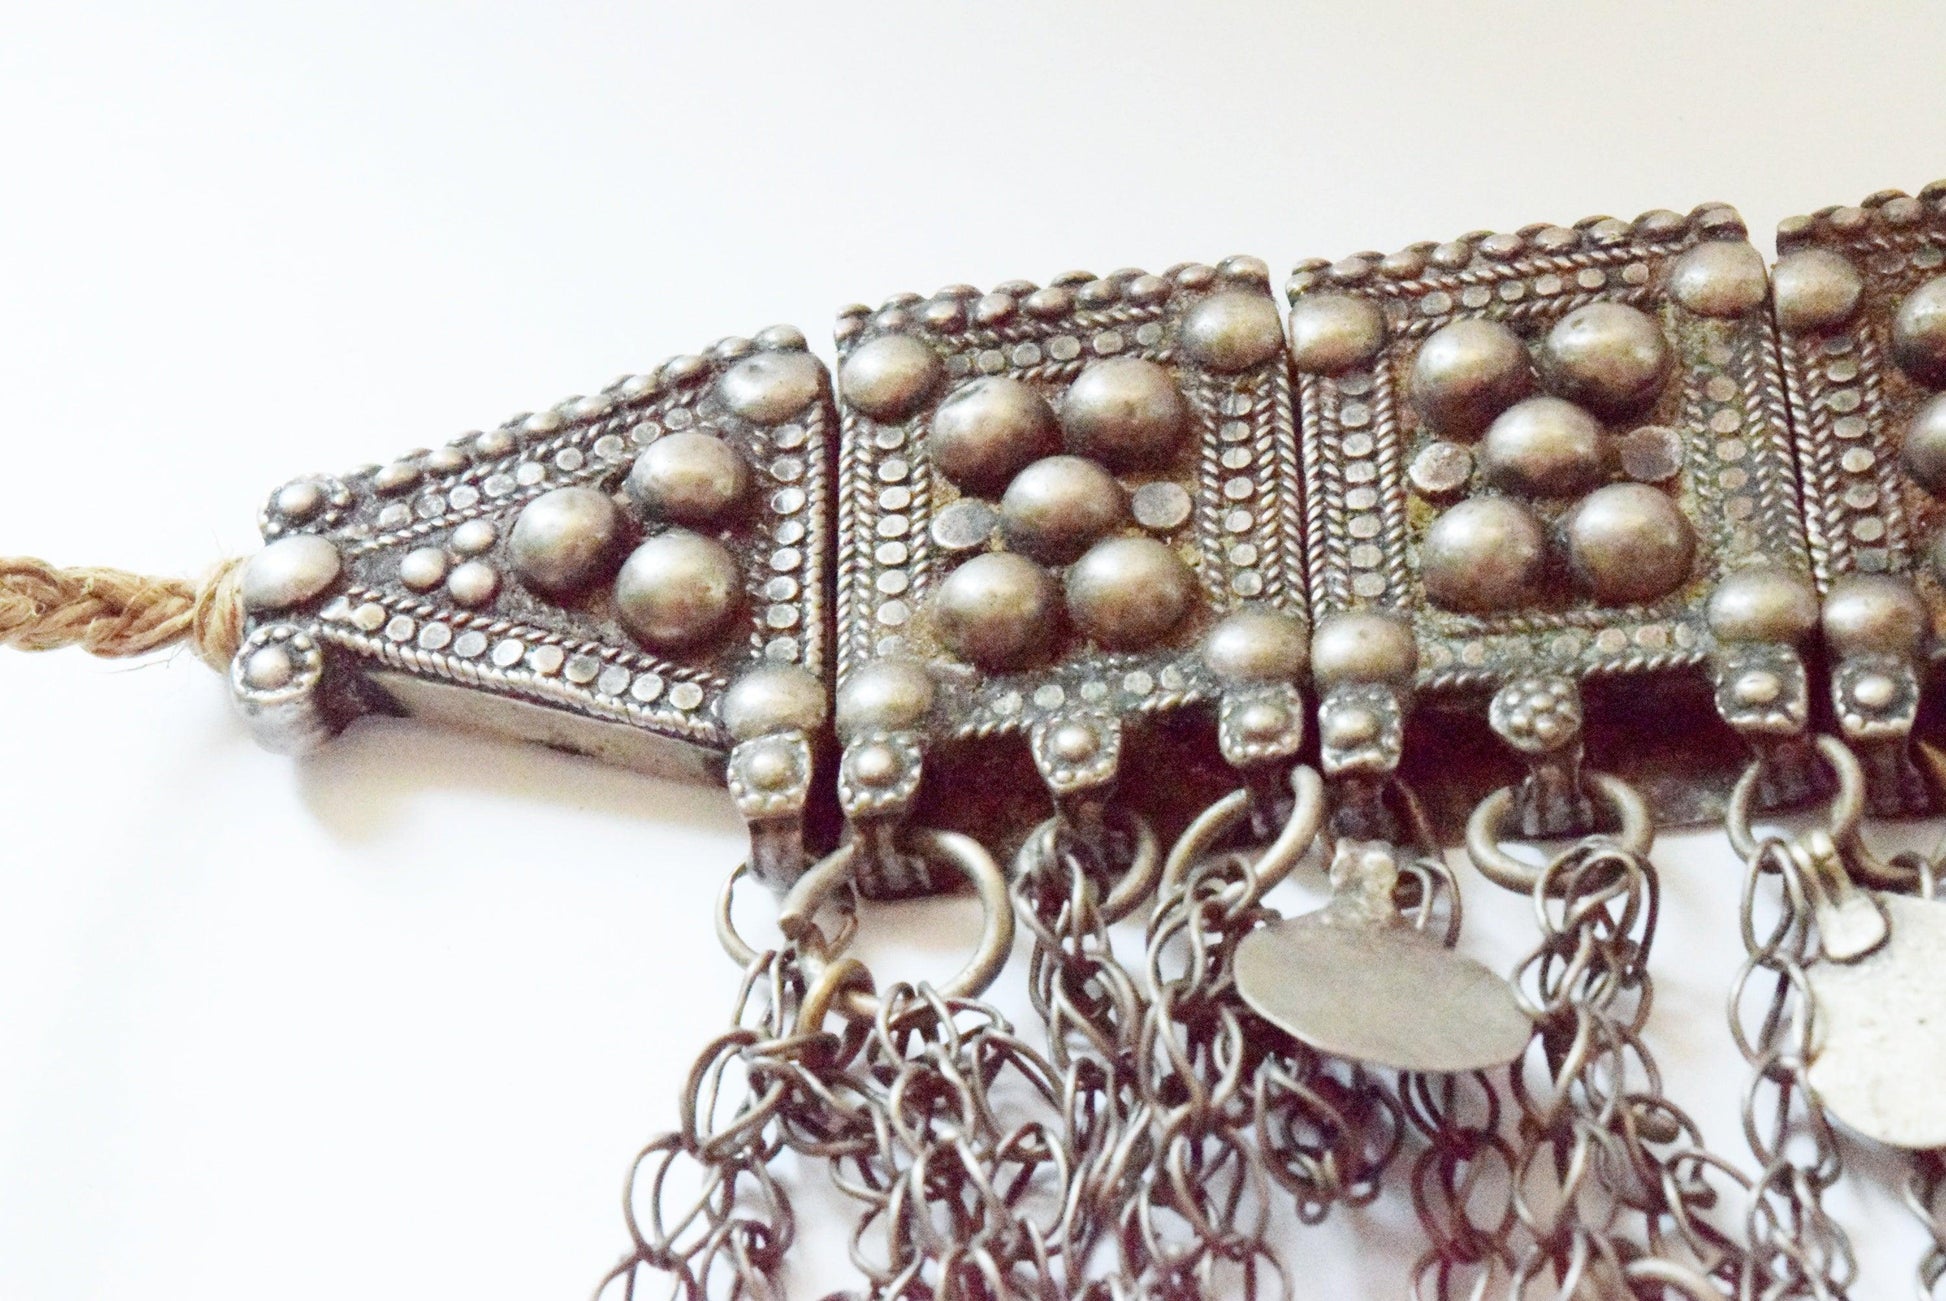 Vintage Silver Bedouin Choker Necklace with Long Chains - Anteeka